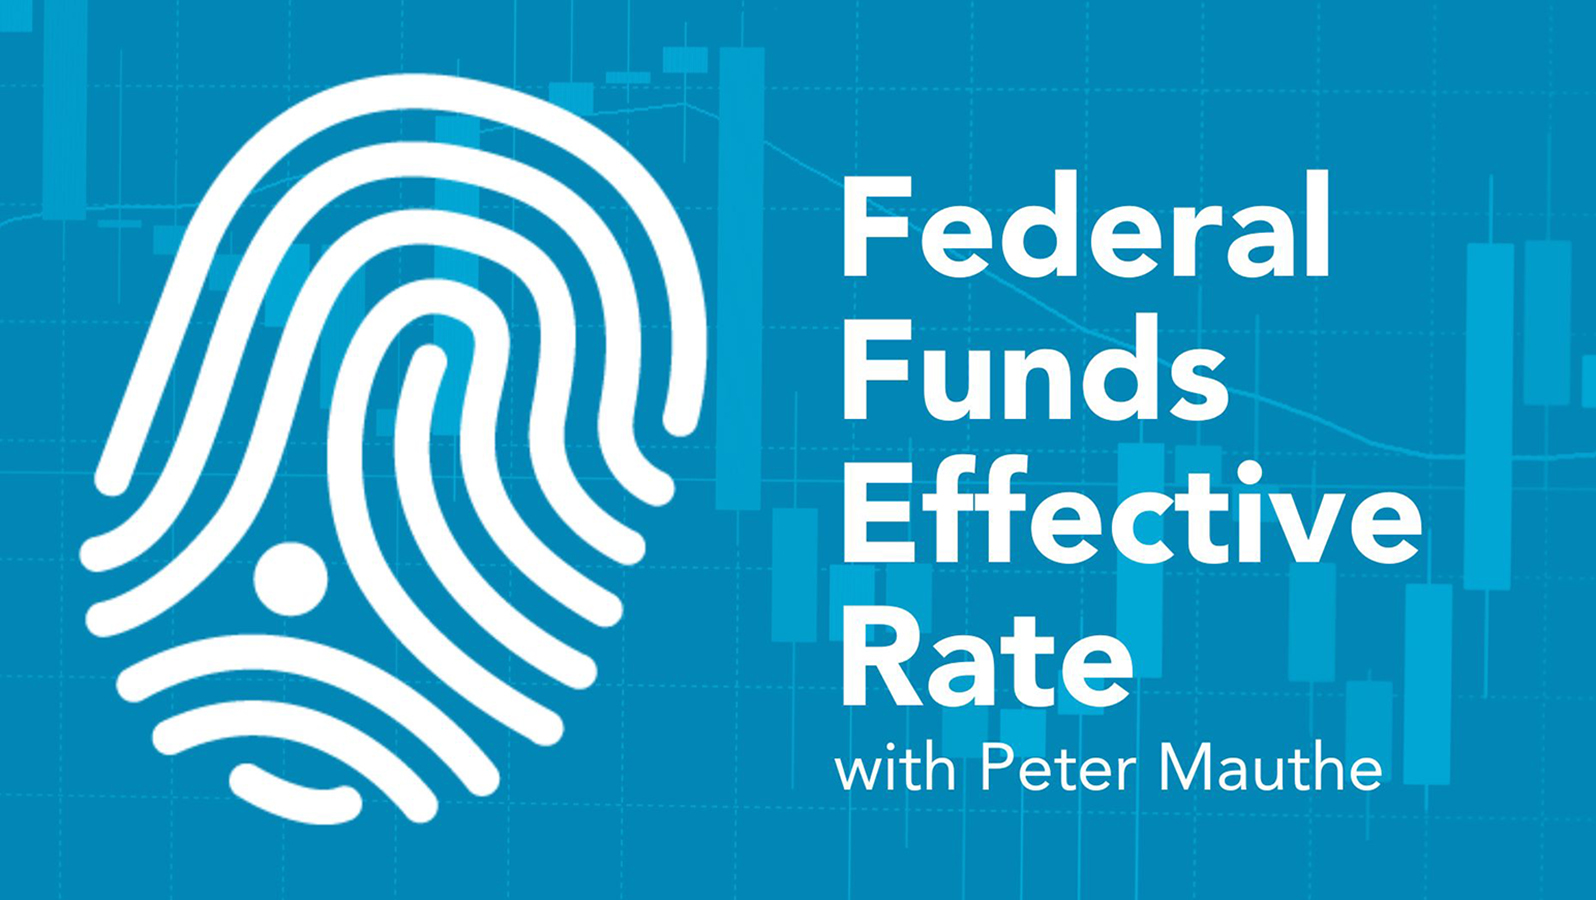 Federal Funds Effective Rate with Peter Mauthe